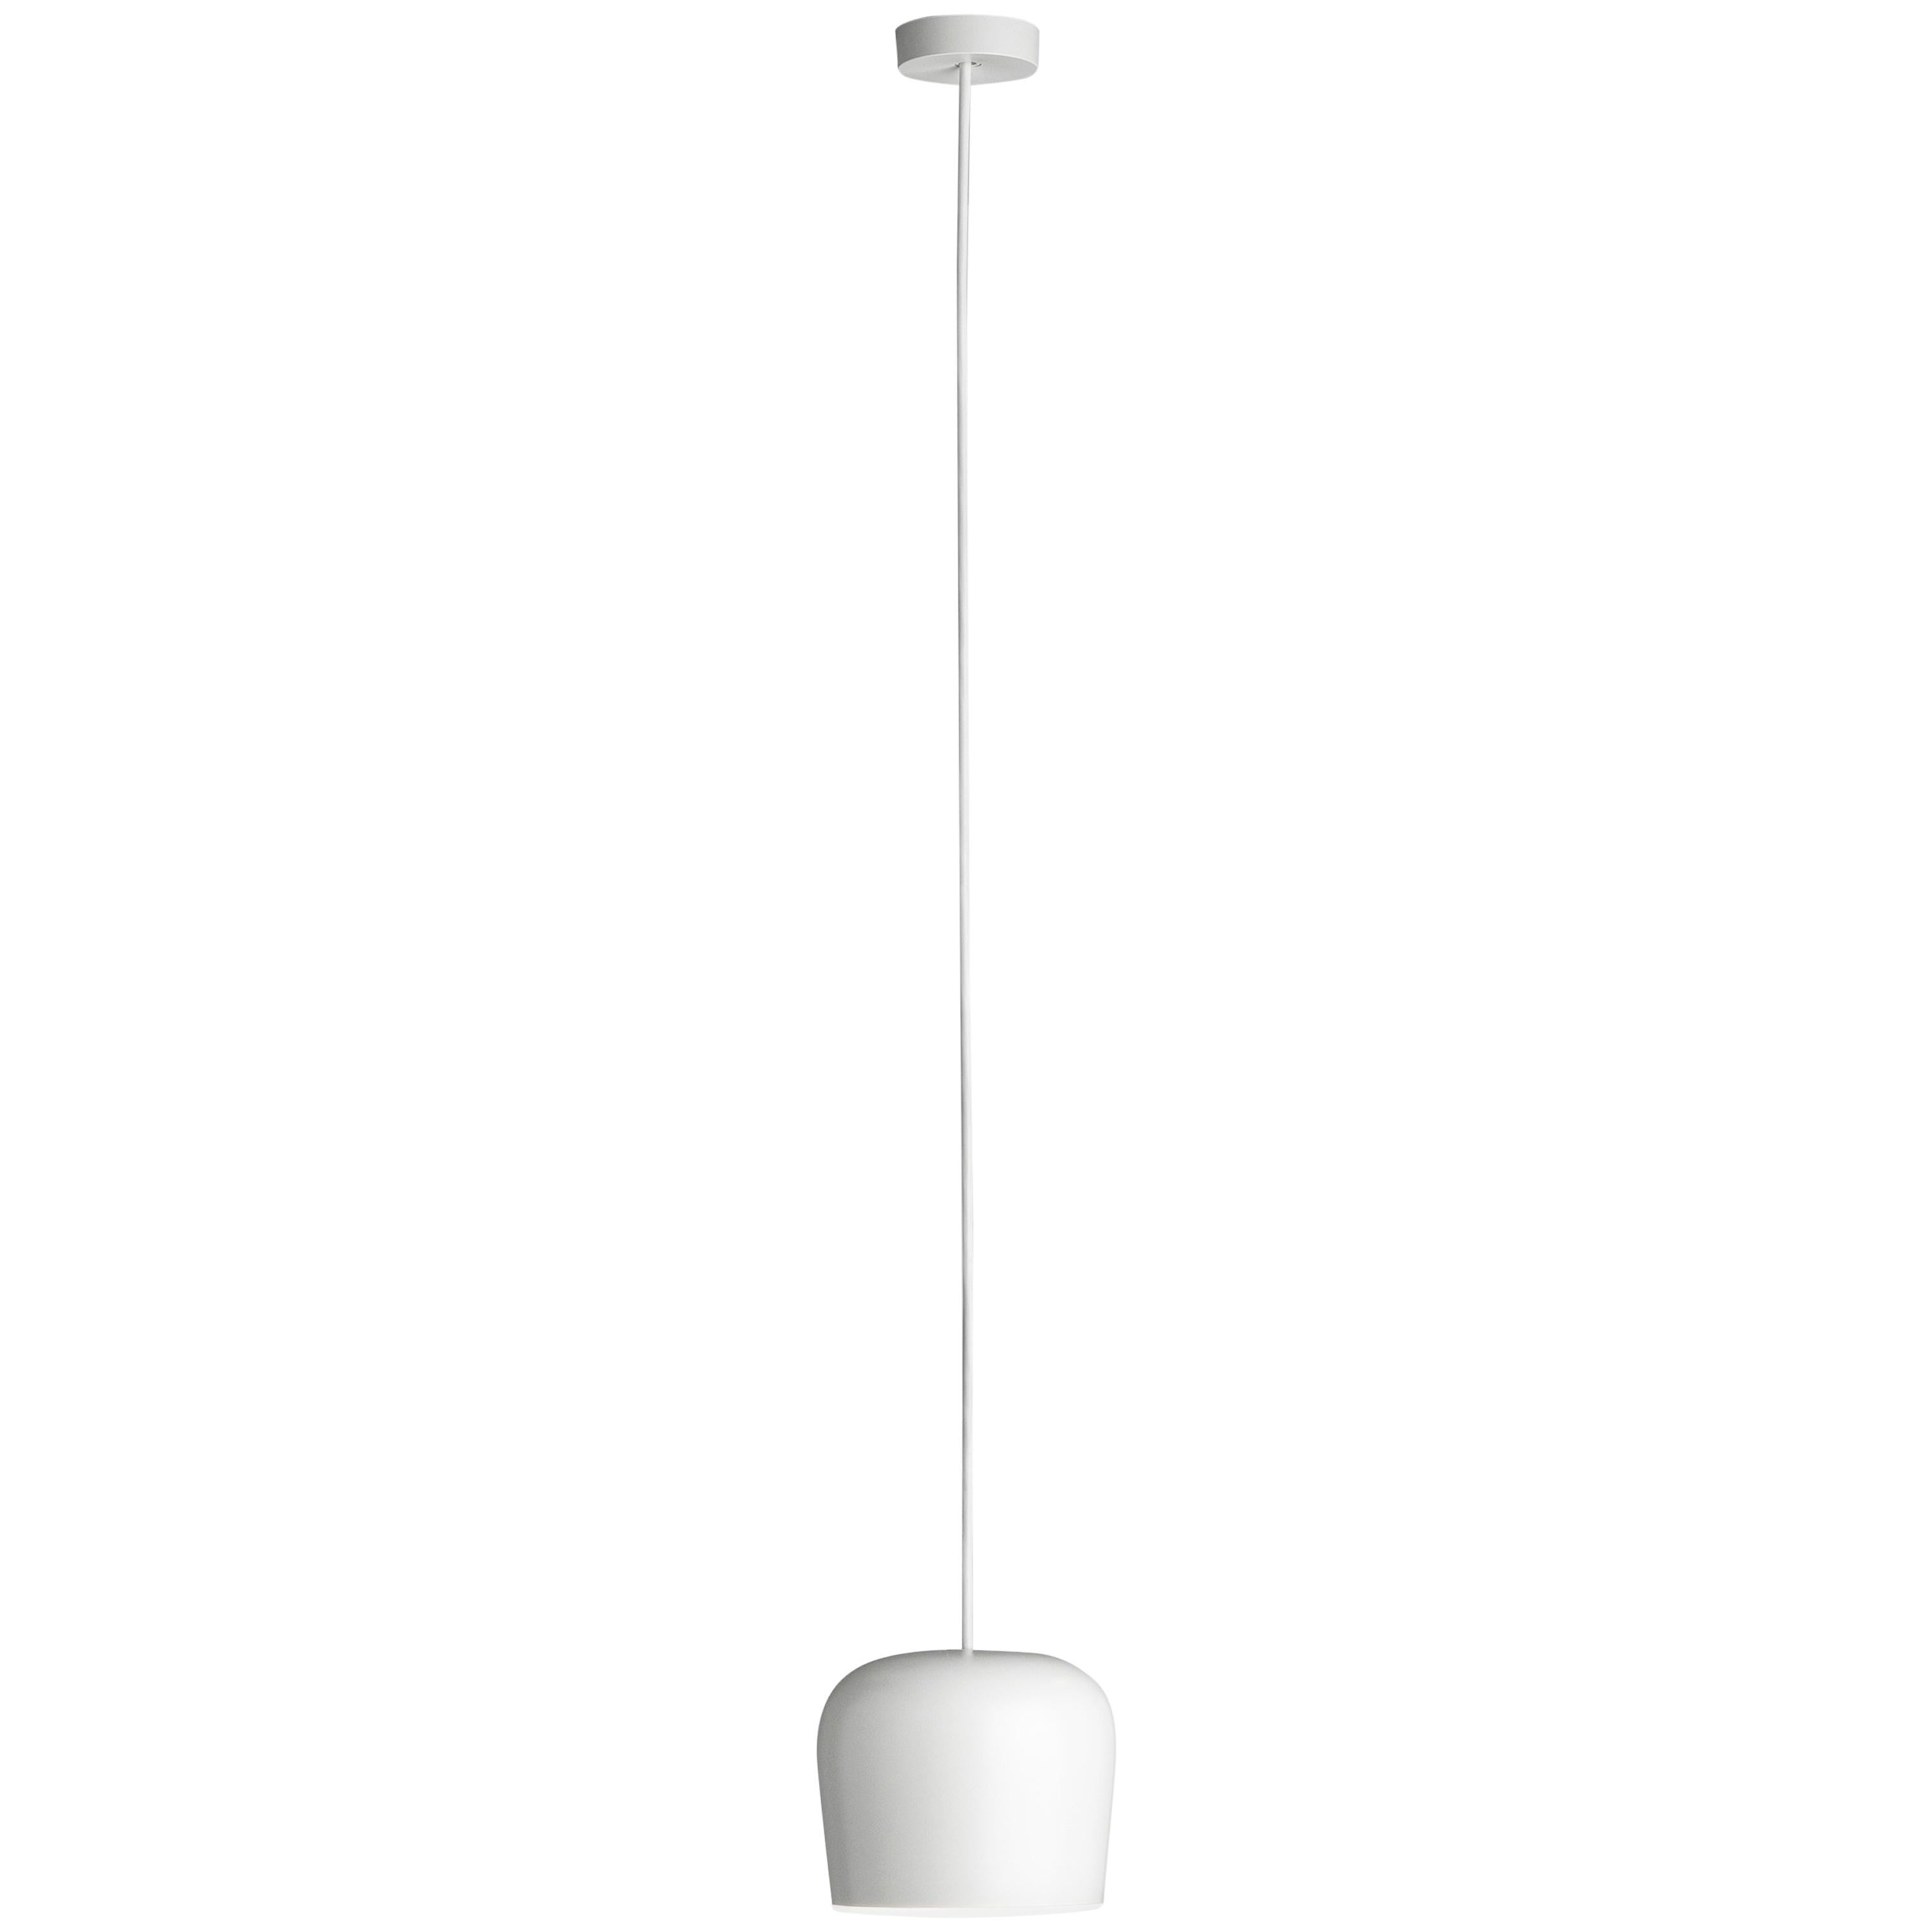 FLOS AIM Plug-In Pendant Light in White by Ronan & Erwan Bouroullec

Created by the Bouroullec brothers in 2010, the AIM ceiling light is a design stripped to its most basic—and beautiful—essence. This innovative form of modern pendant lighting is